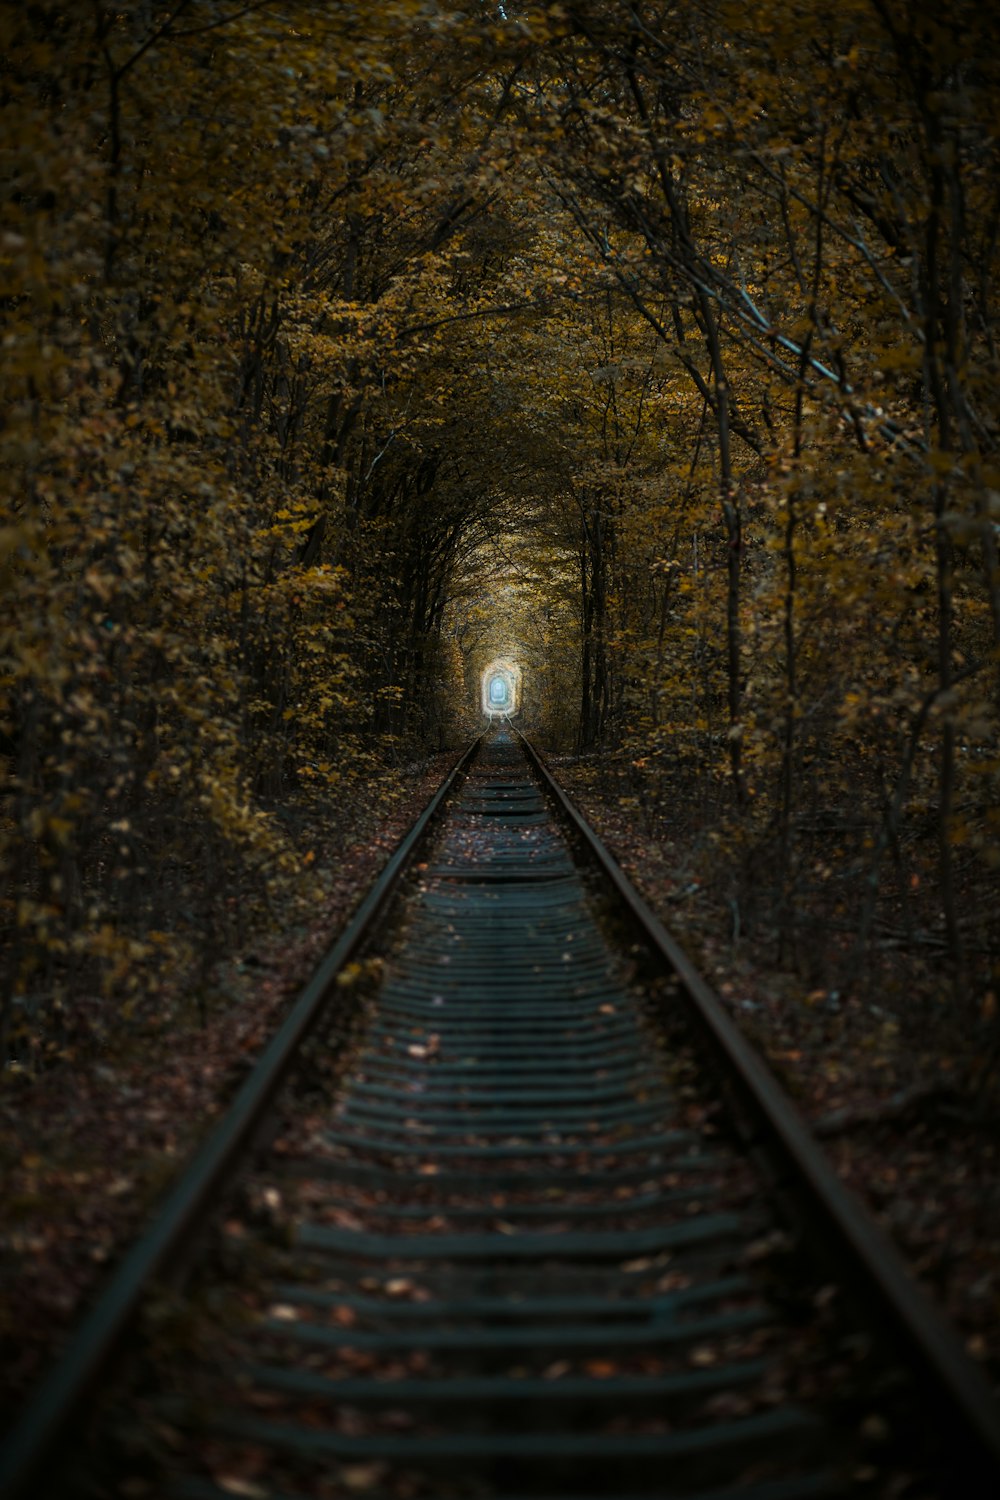 train rail in the forest